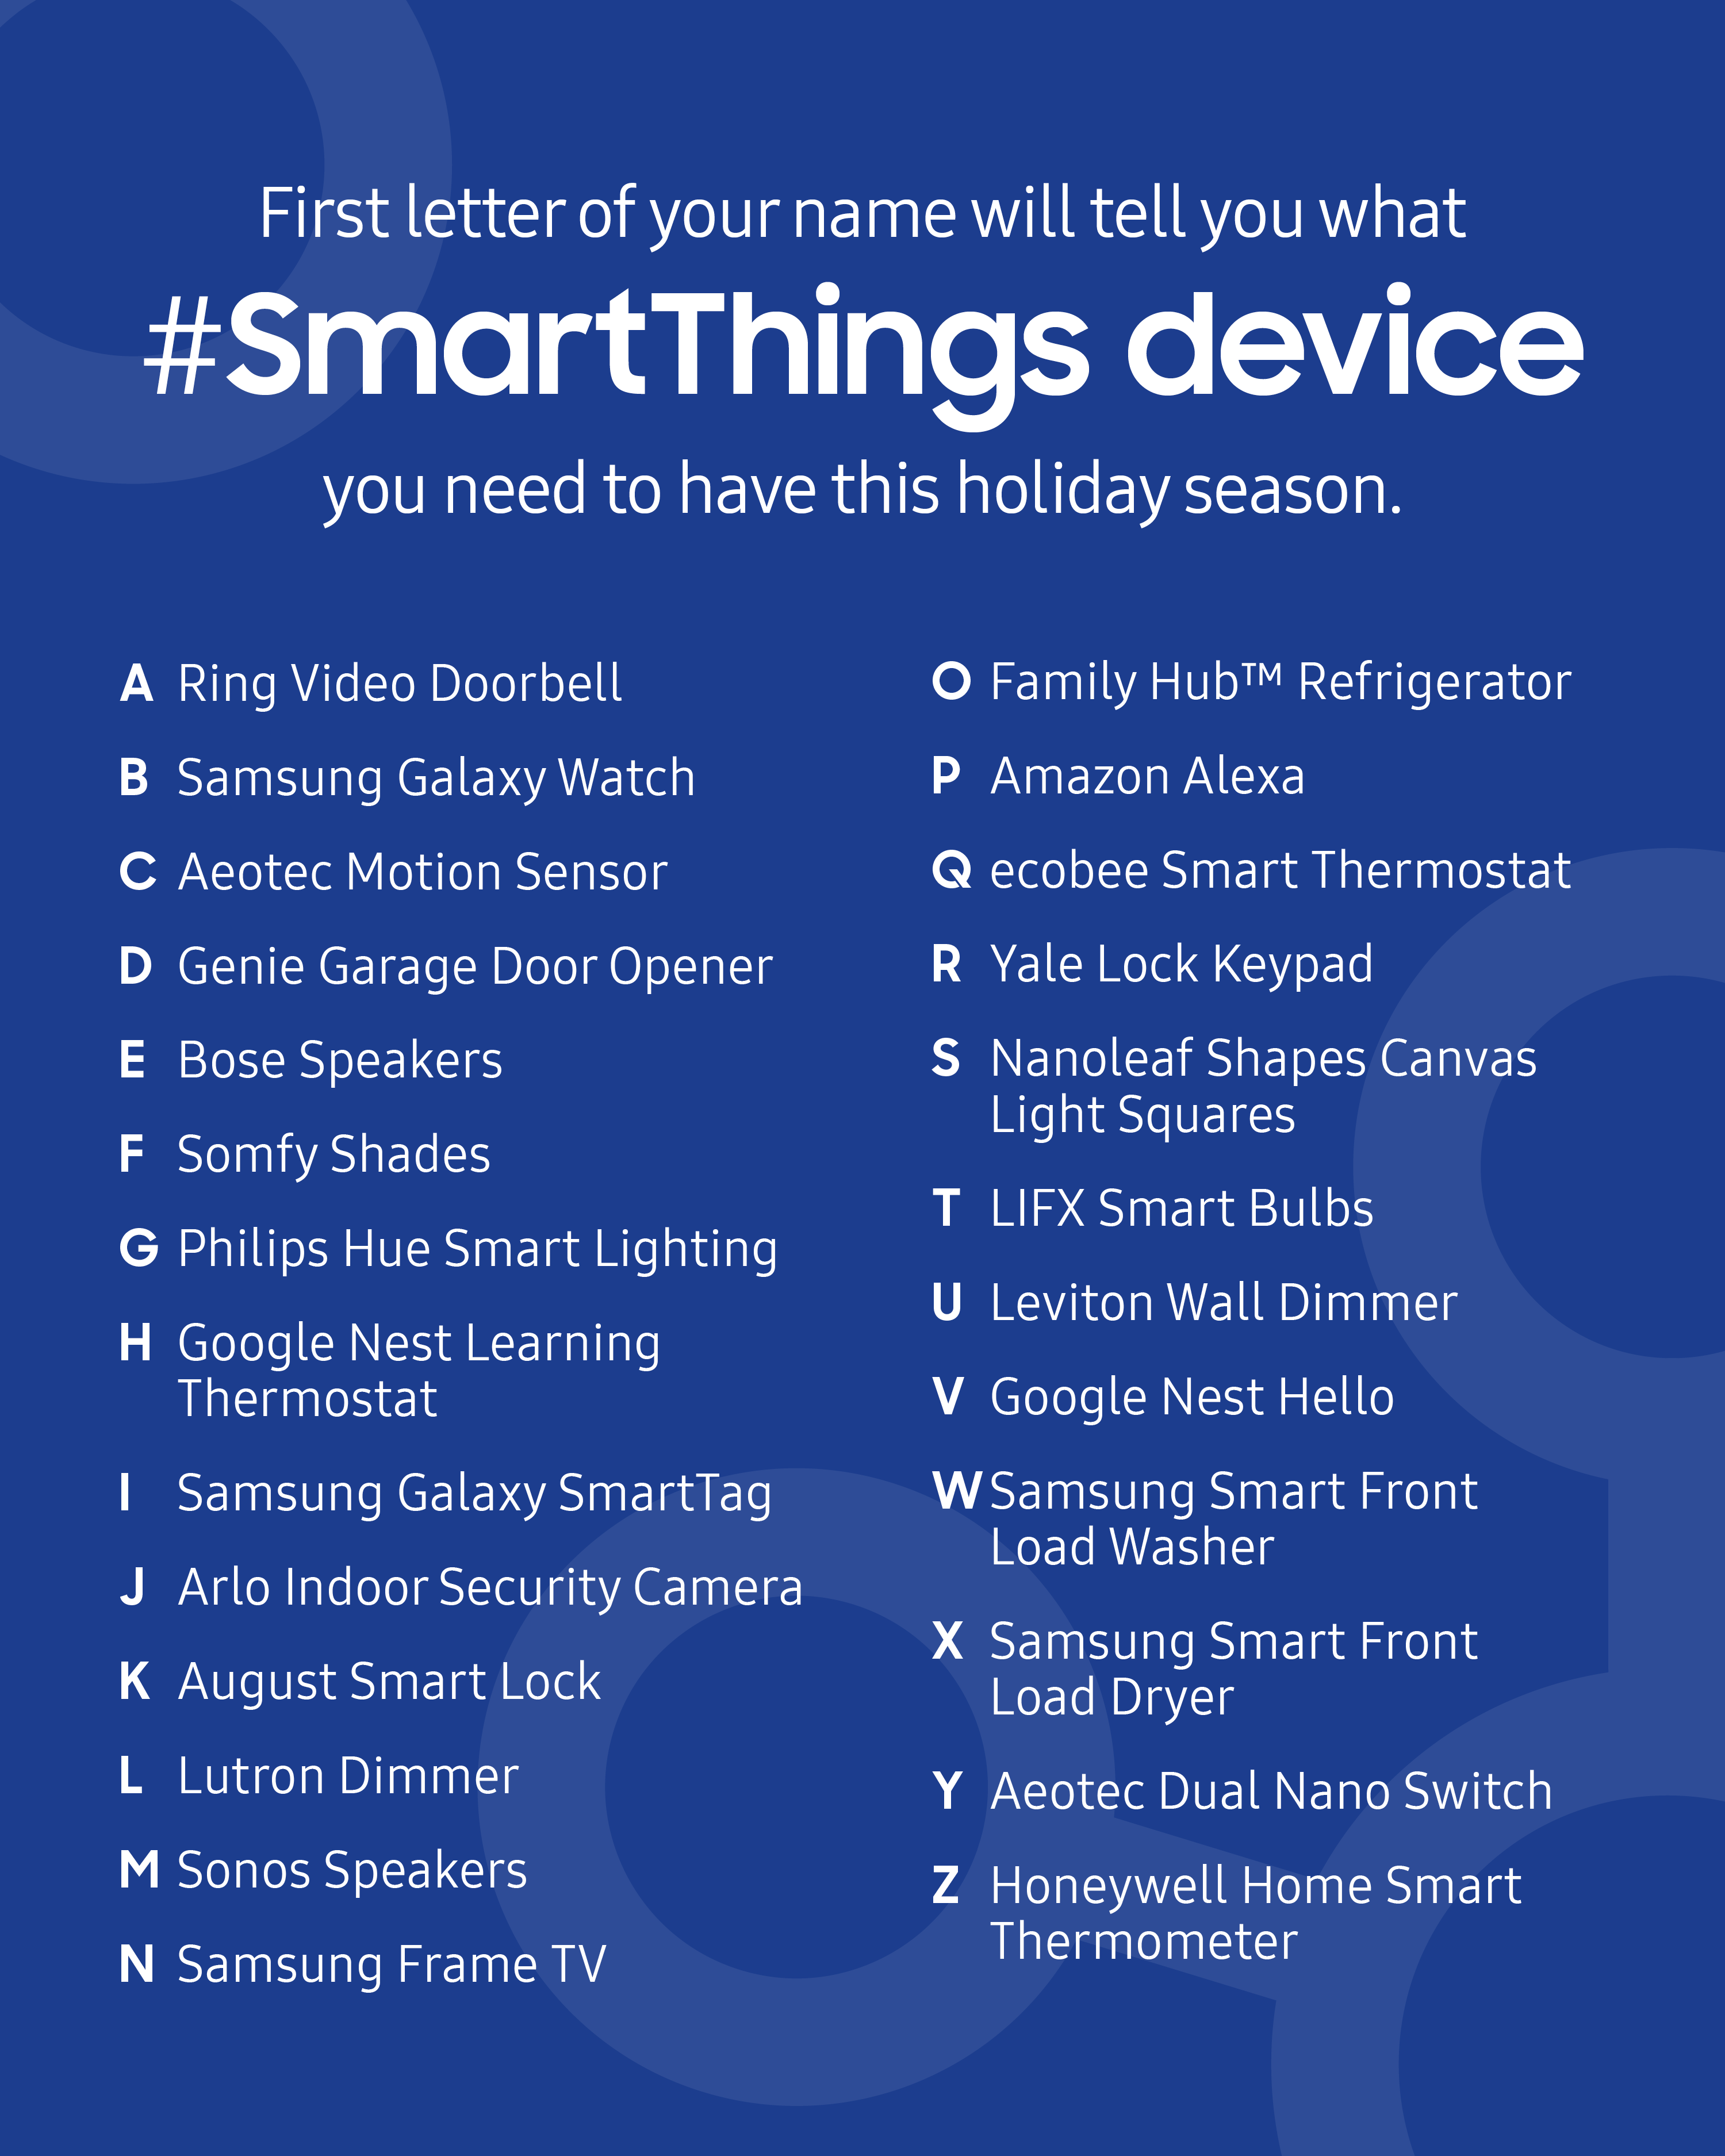 SmartThings on Twitter: "Comment device you'll be adding to your # SmartThings universe soon! https://t.co/rlKDksBWac" /